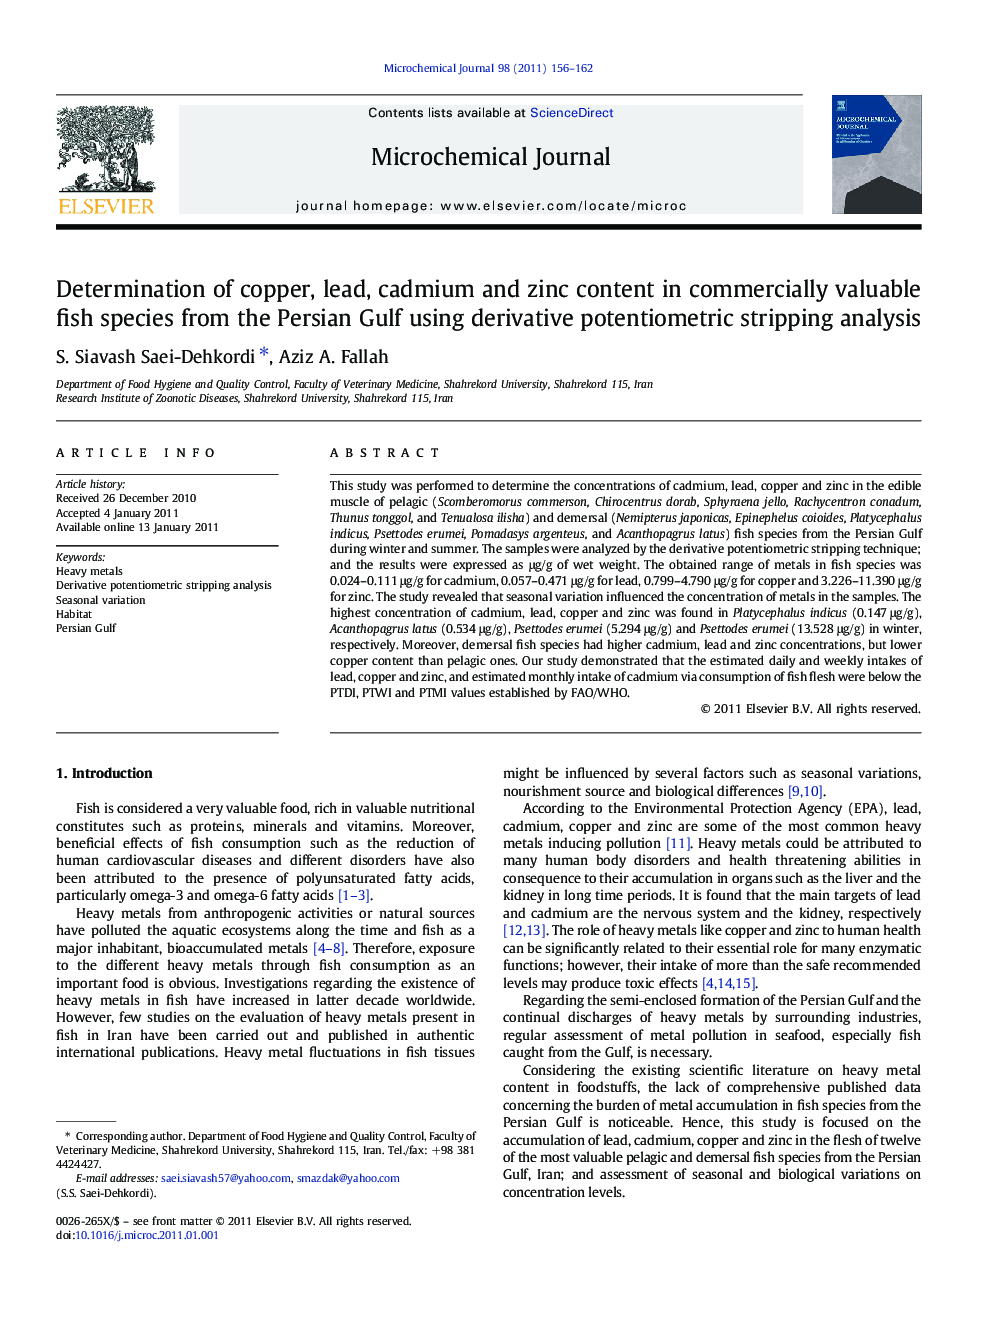 Determination of copper, lead, cadmium and zinc content in commercially valuable fish species from the Persian Gulf using derivative potentiometric stripping analysis